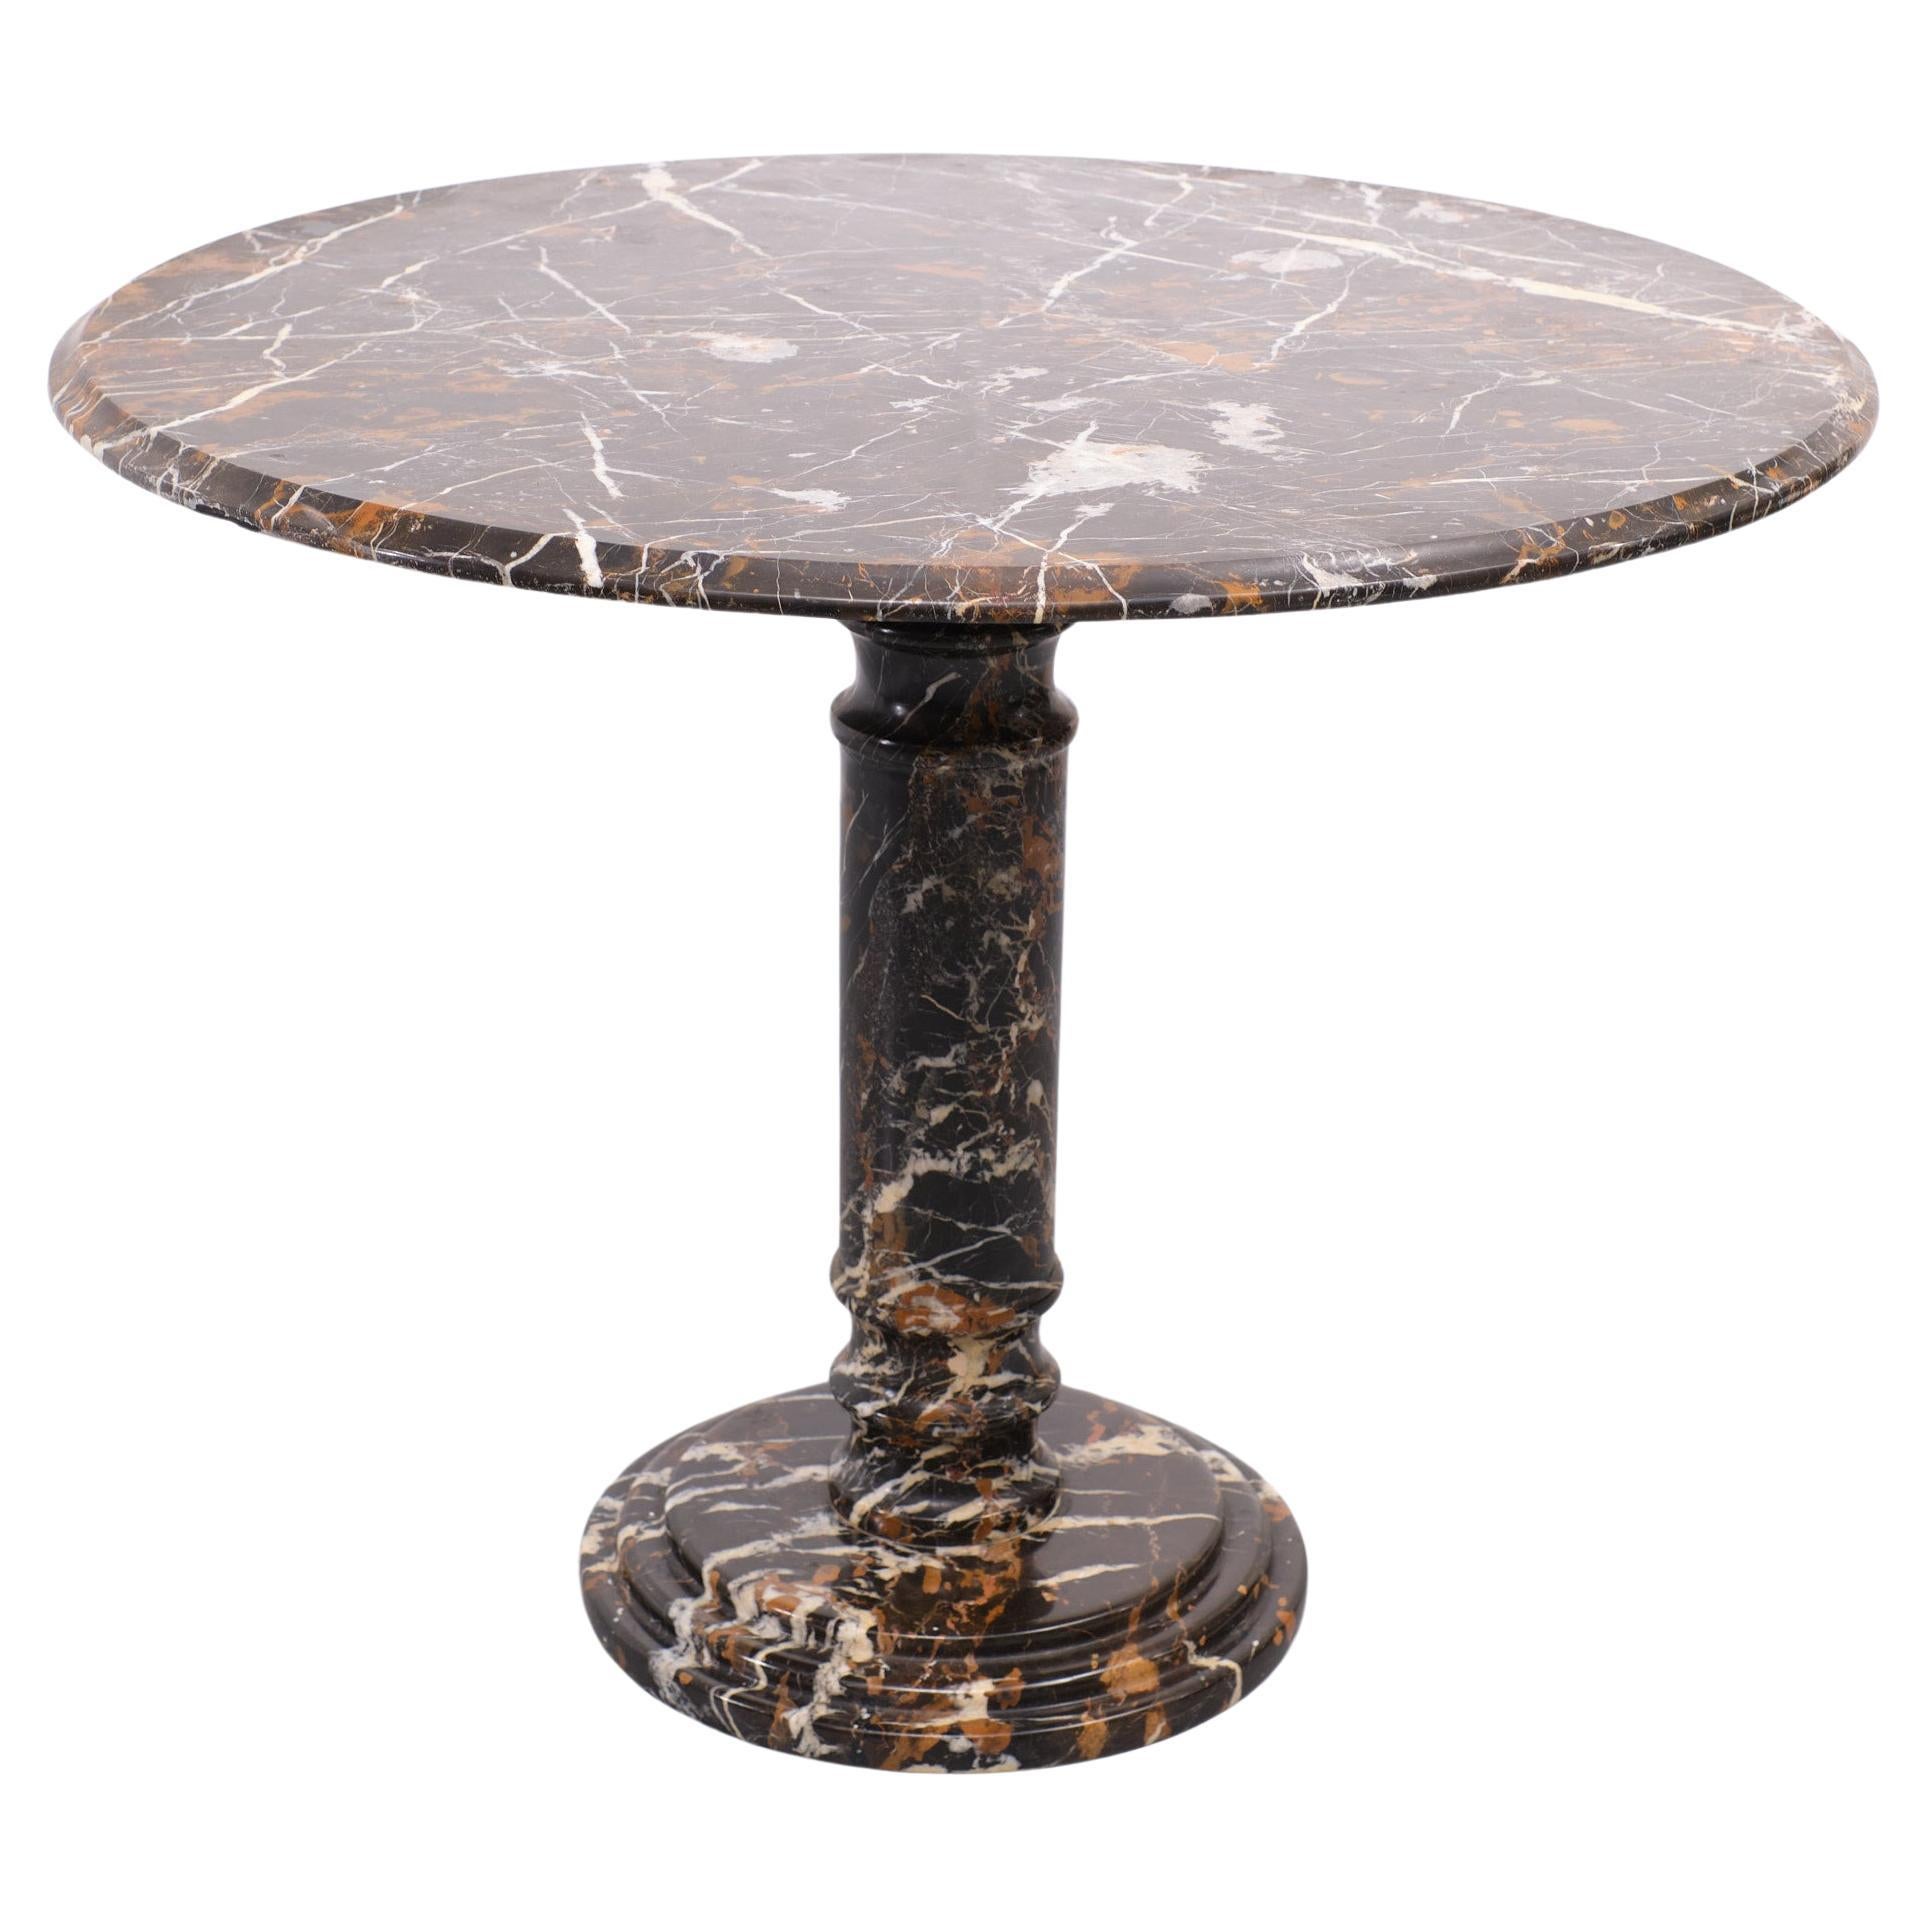 Stunning center table executed in portoro marble. So full of live and color.
Art Deco portoro marble or marmo di portovenere? It is quarried in the Gulf of La Spezia (Liguria), Italy.
The Portoro is a fine-grained, black marble with gold veining